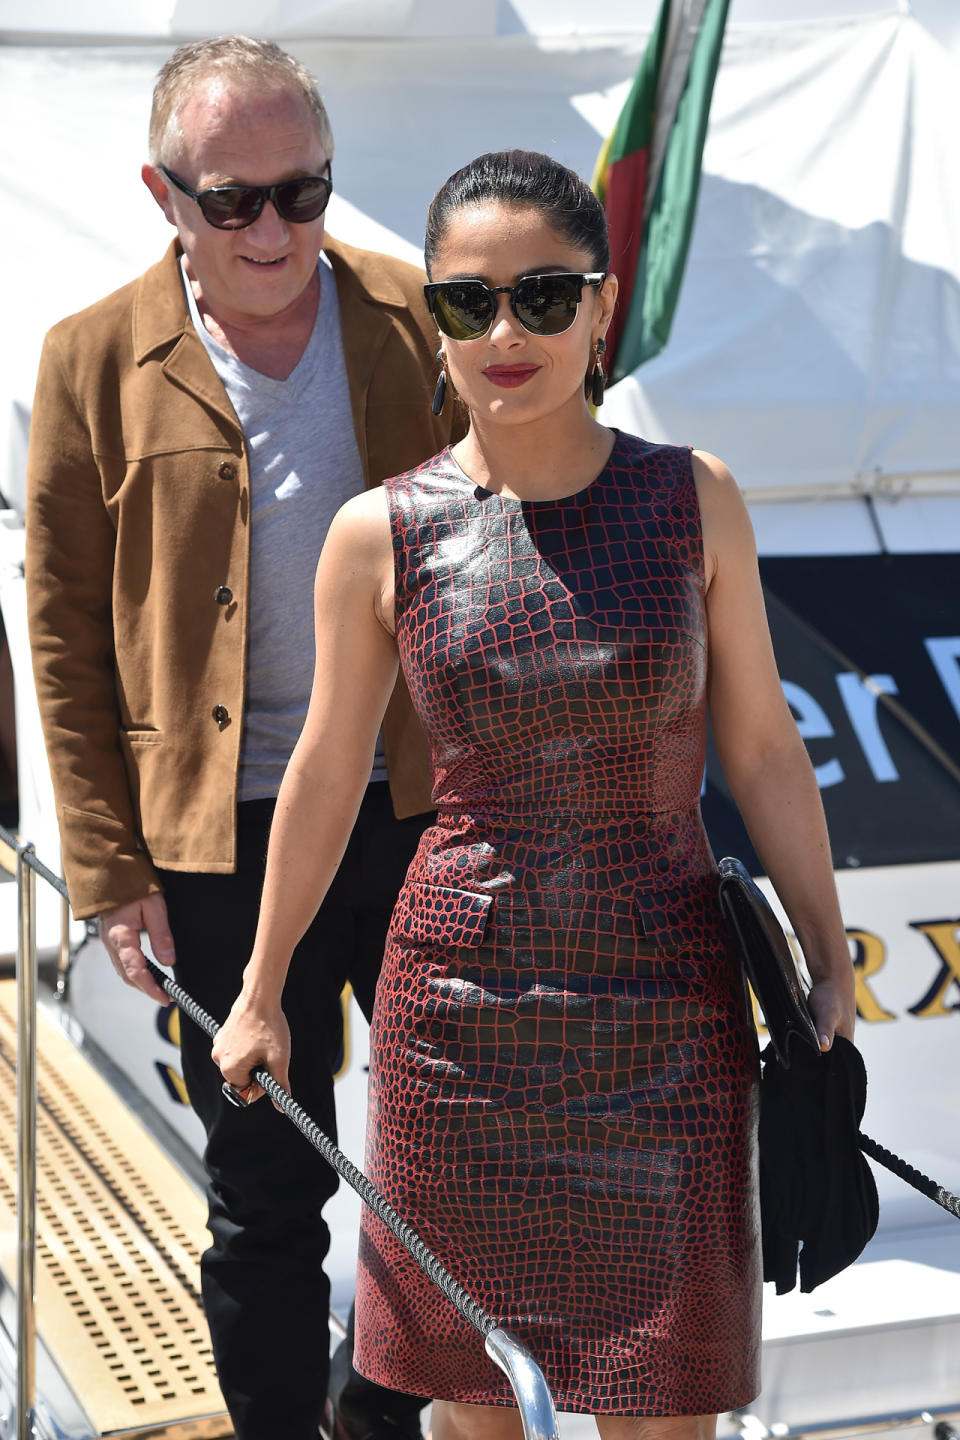 This isn’t the first time Hayek wore black and red to this year’s film festival (she wore a floral Alexander McQueen to the photocall for “The Tale of Tales”), but this short, casual dress is so much more appropriate for a boat.